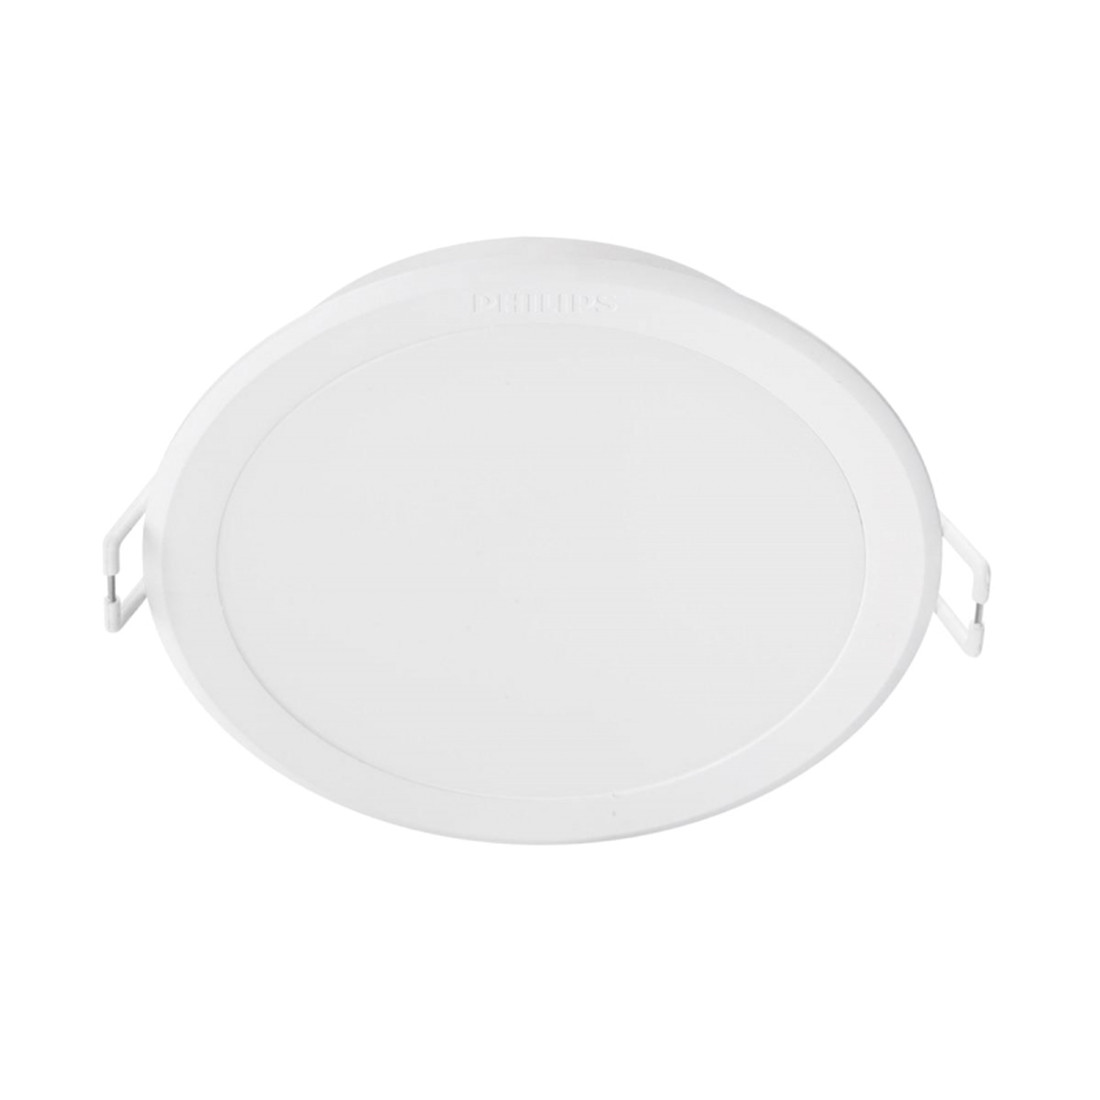 Светильник Philips 59466 MESON 150 17W 65K WH recessed LED 2-014570 915005748801